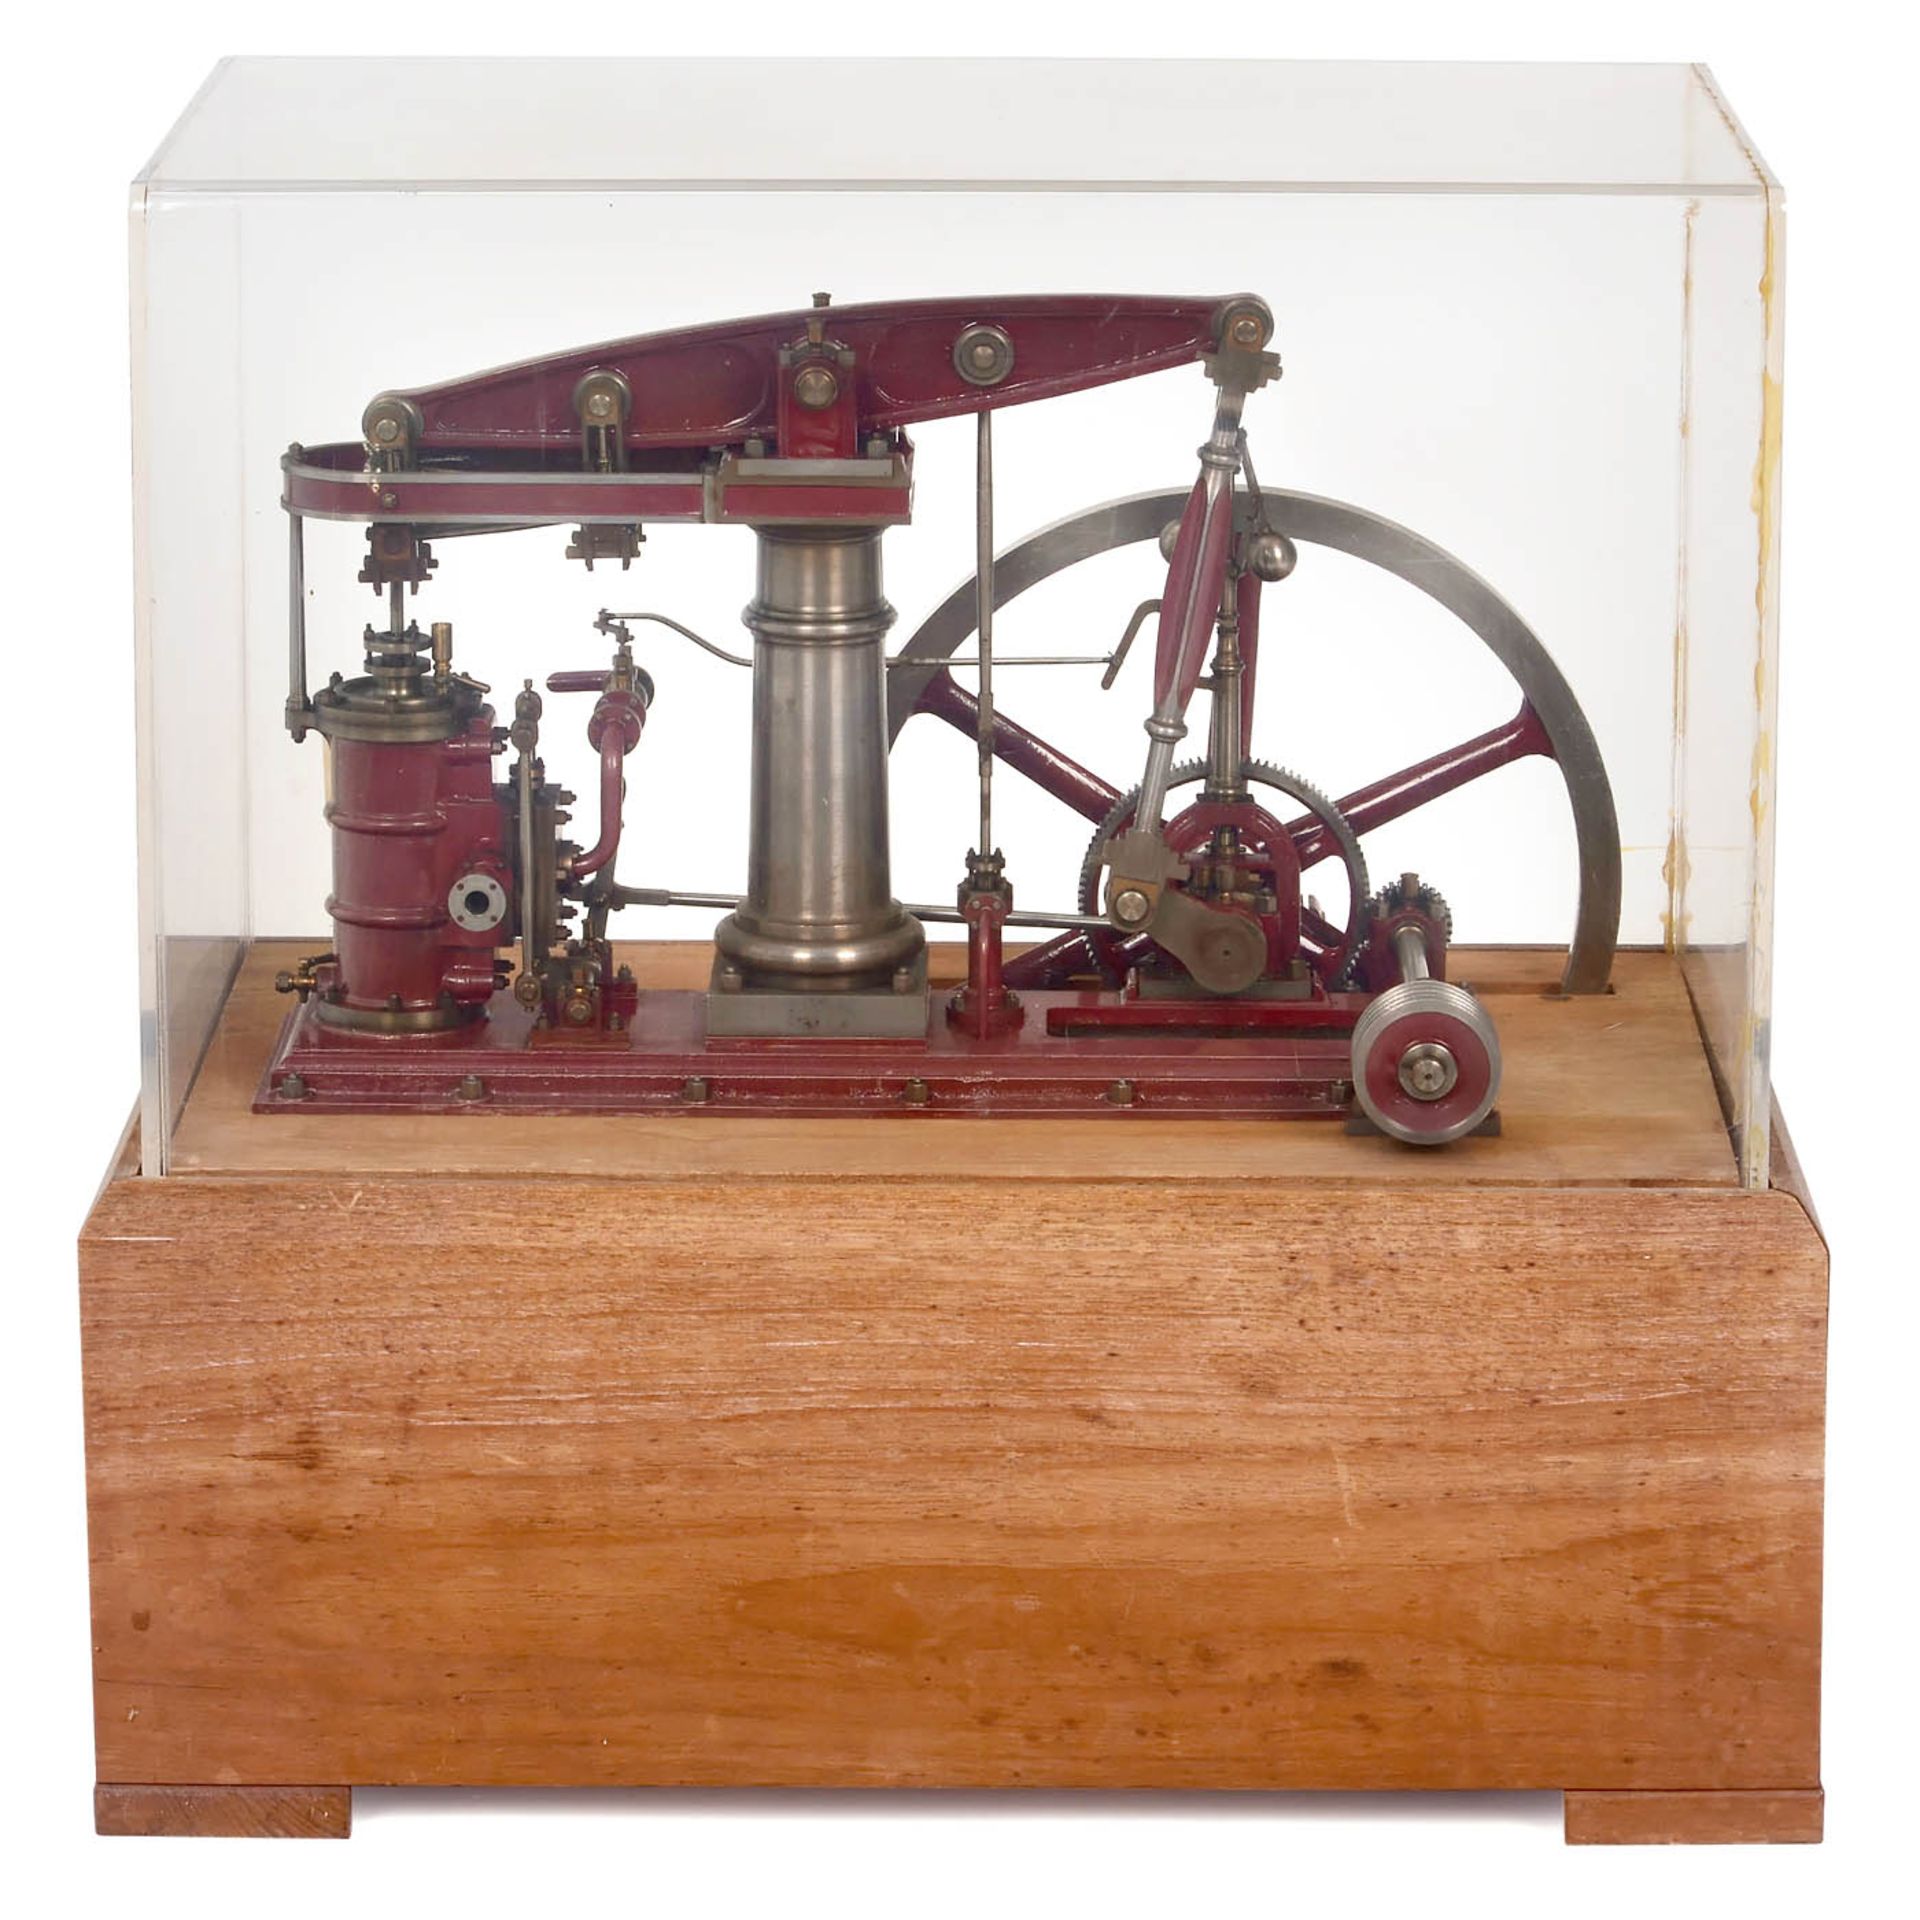 Electric Model of a Walking Beam Steam Engine, c. 1970 - Image 3 of 3